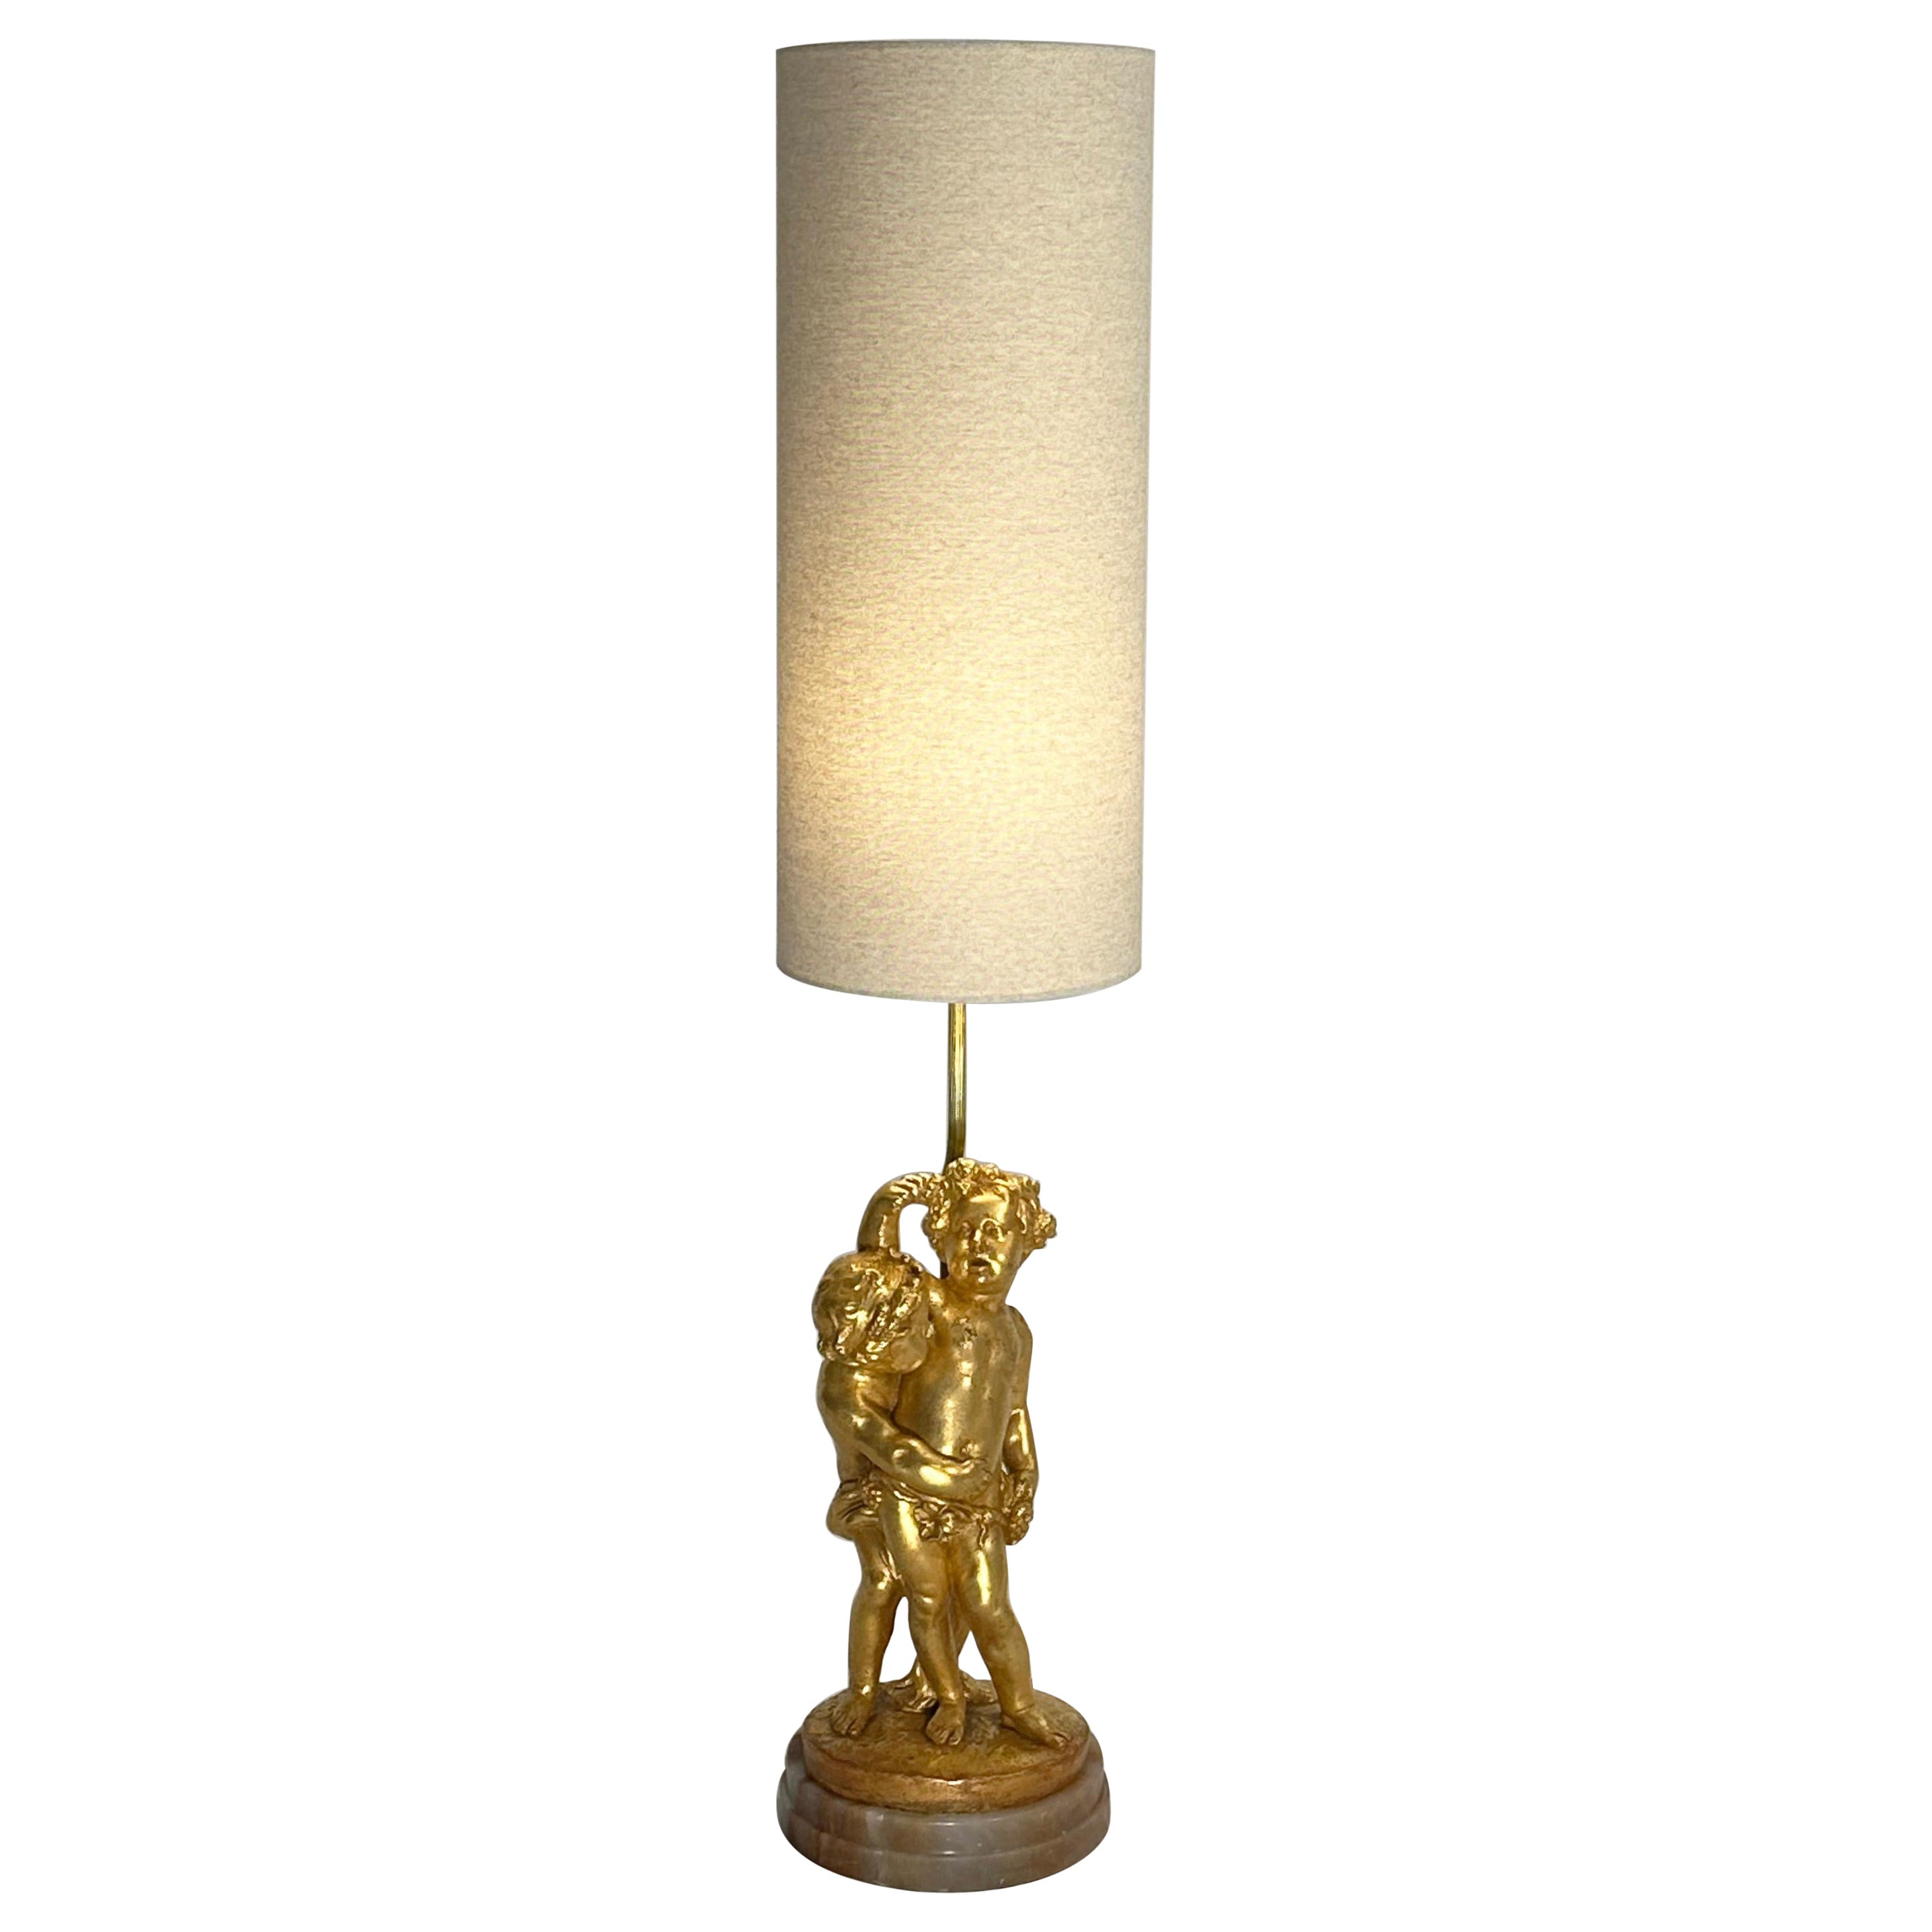 Vintage Gold Rococo Style Putti Lamp on Onyx Base